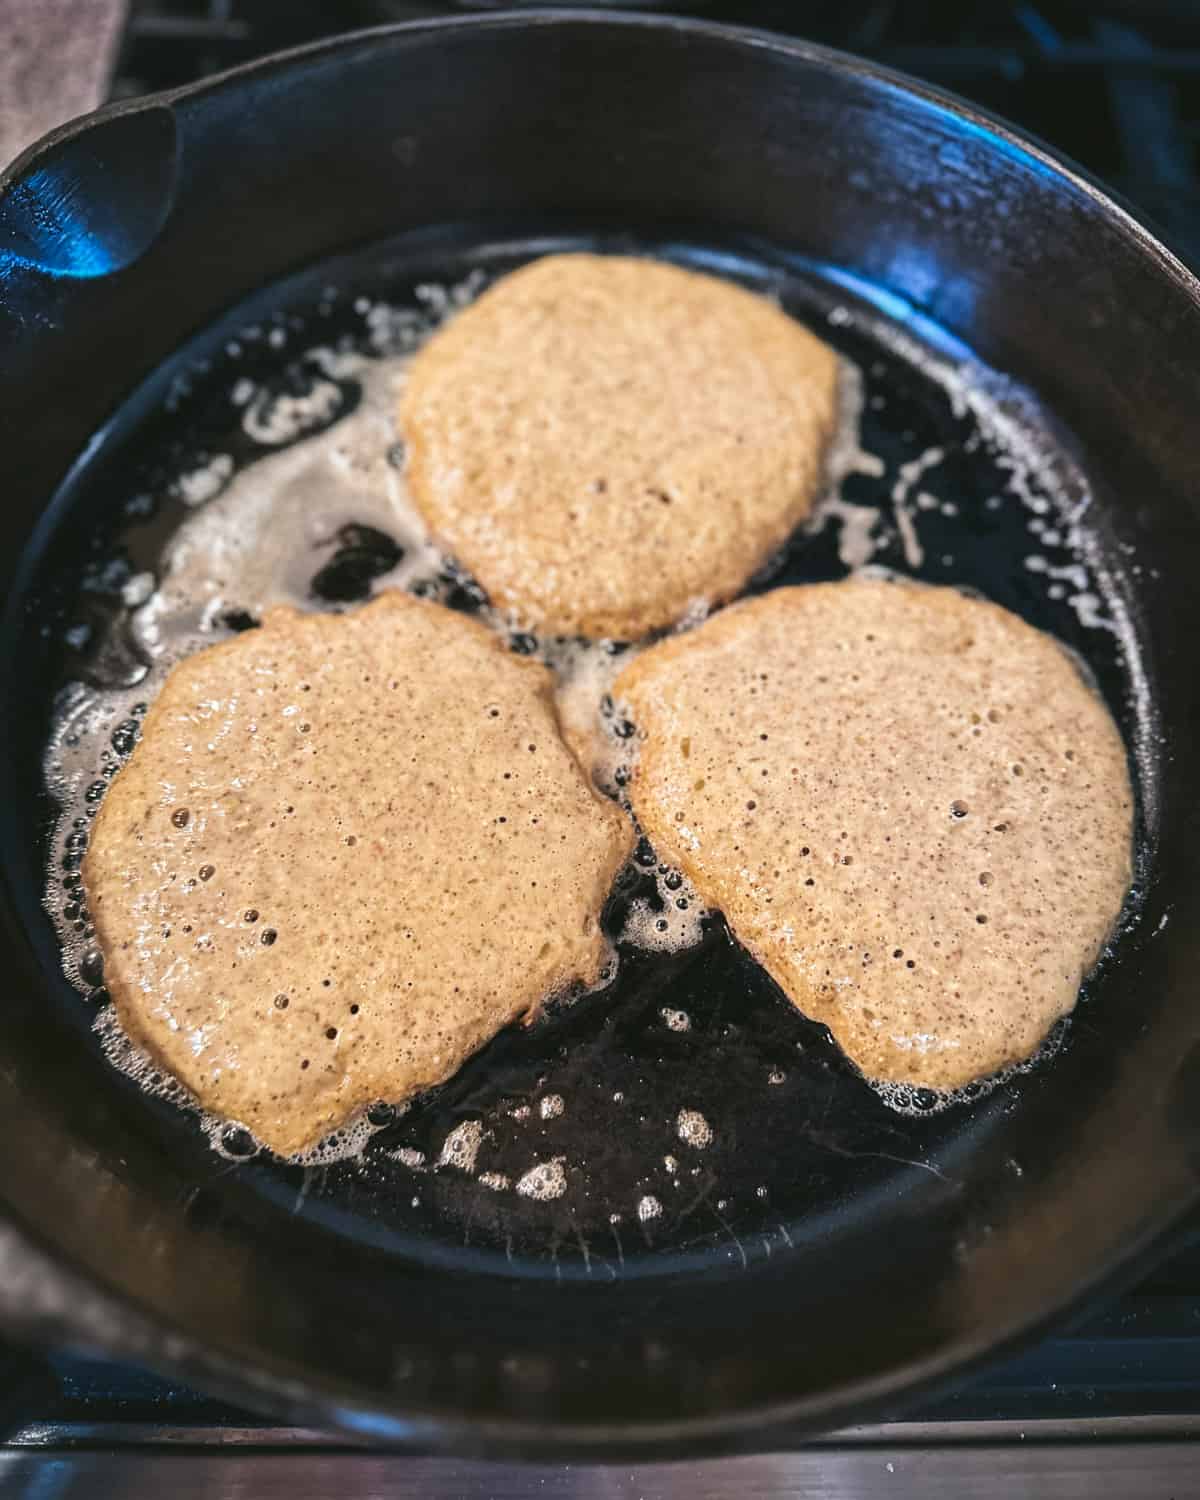 Acorn pancakes cooking showing bubbles in the batter ready to flip. 